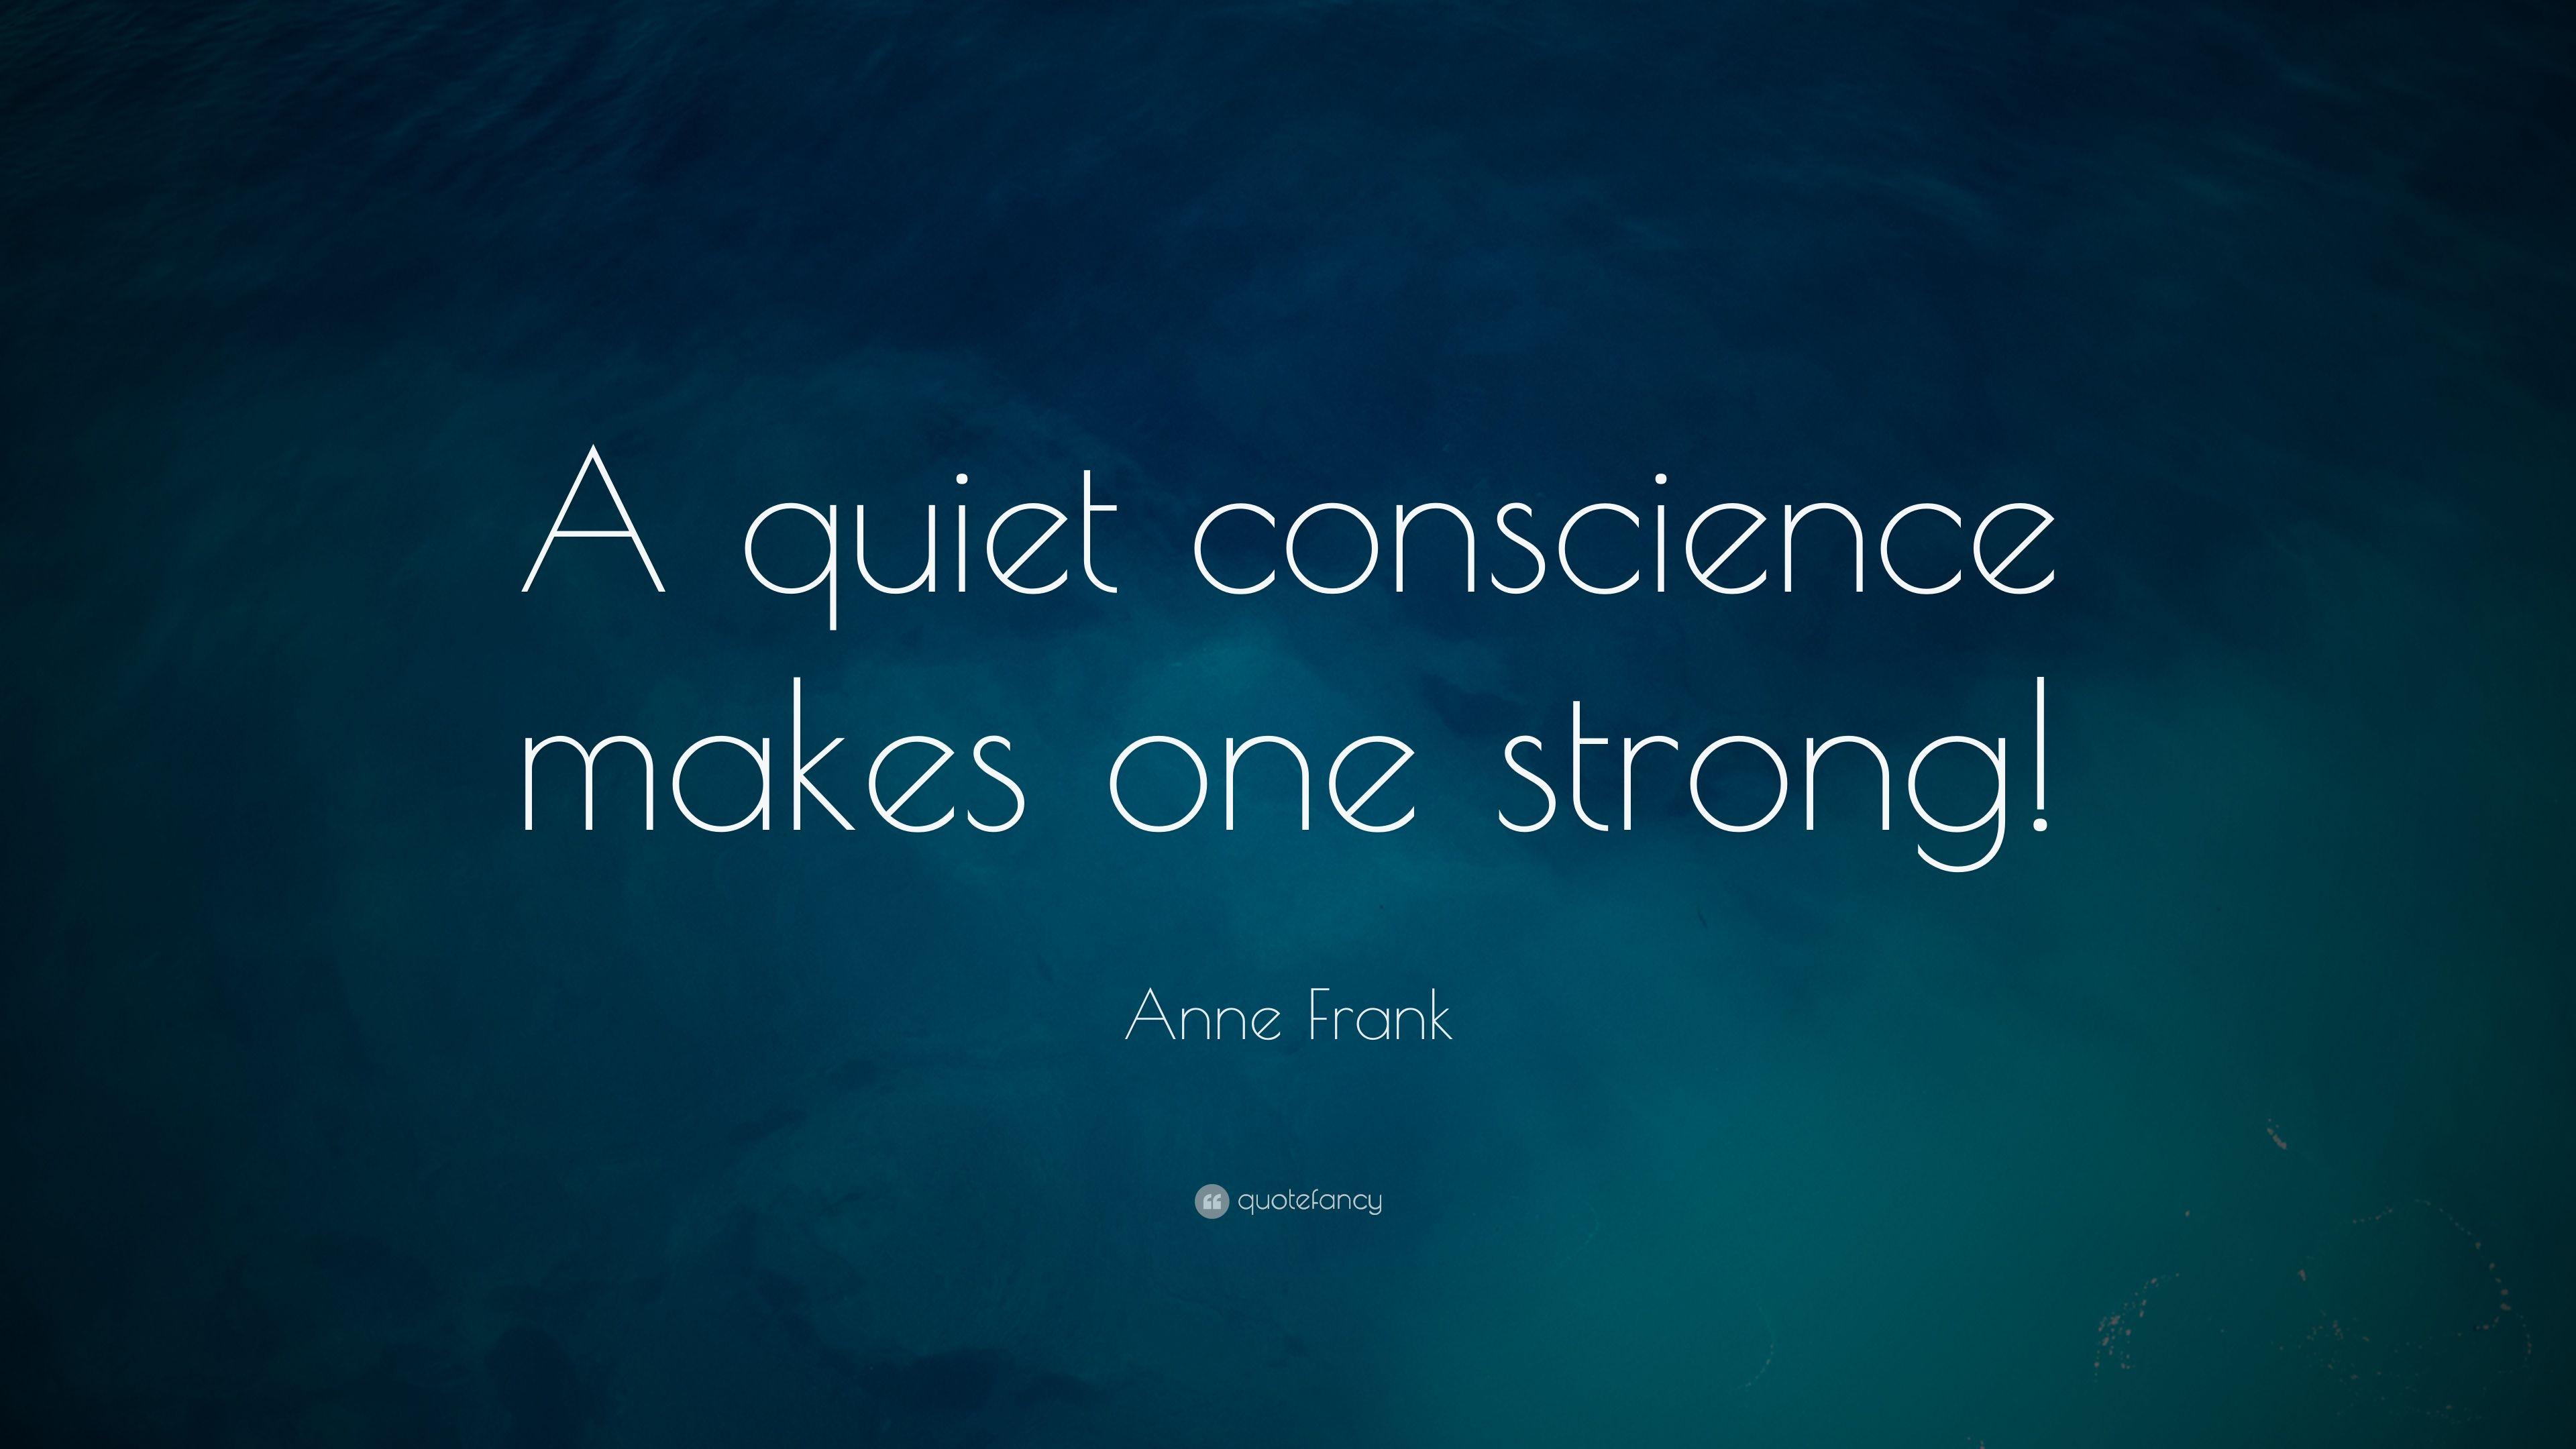 Anne Frank Quote: “A quiet conscience makes one strong!” 15